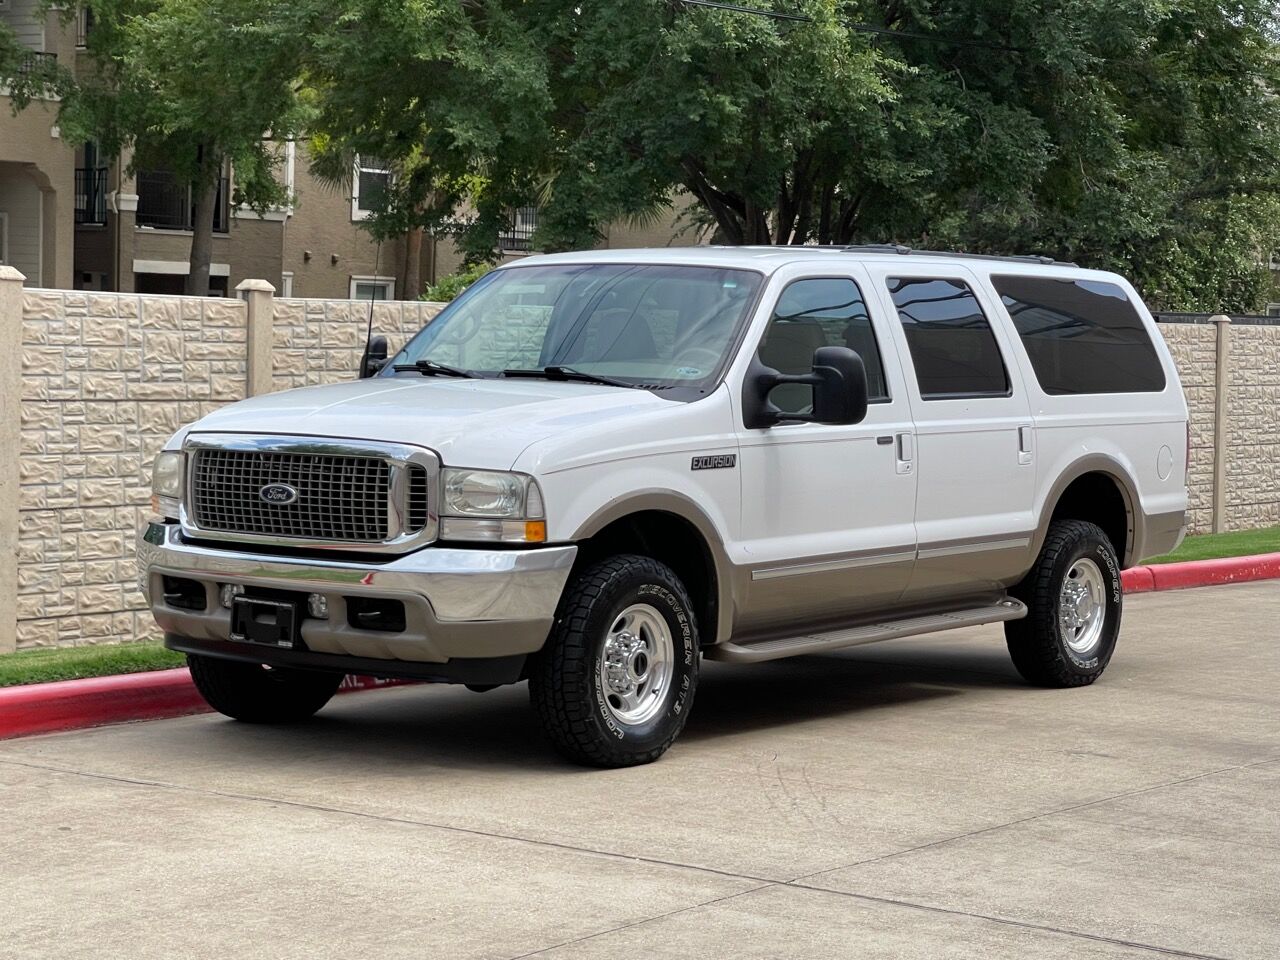 2002 Ford Excursion For Sale - Carsforsale.com®